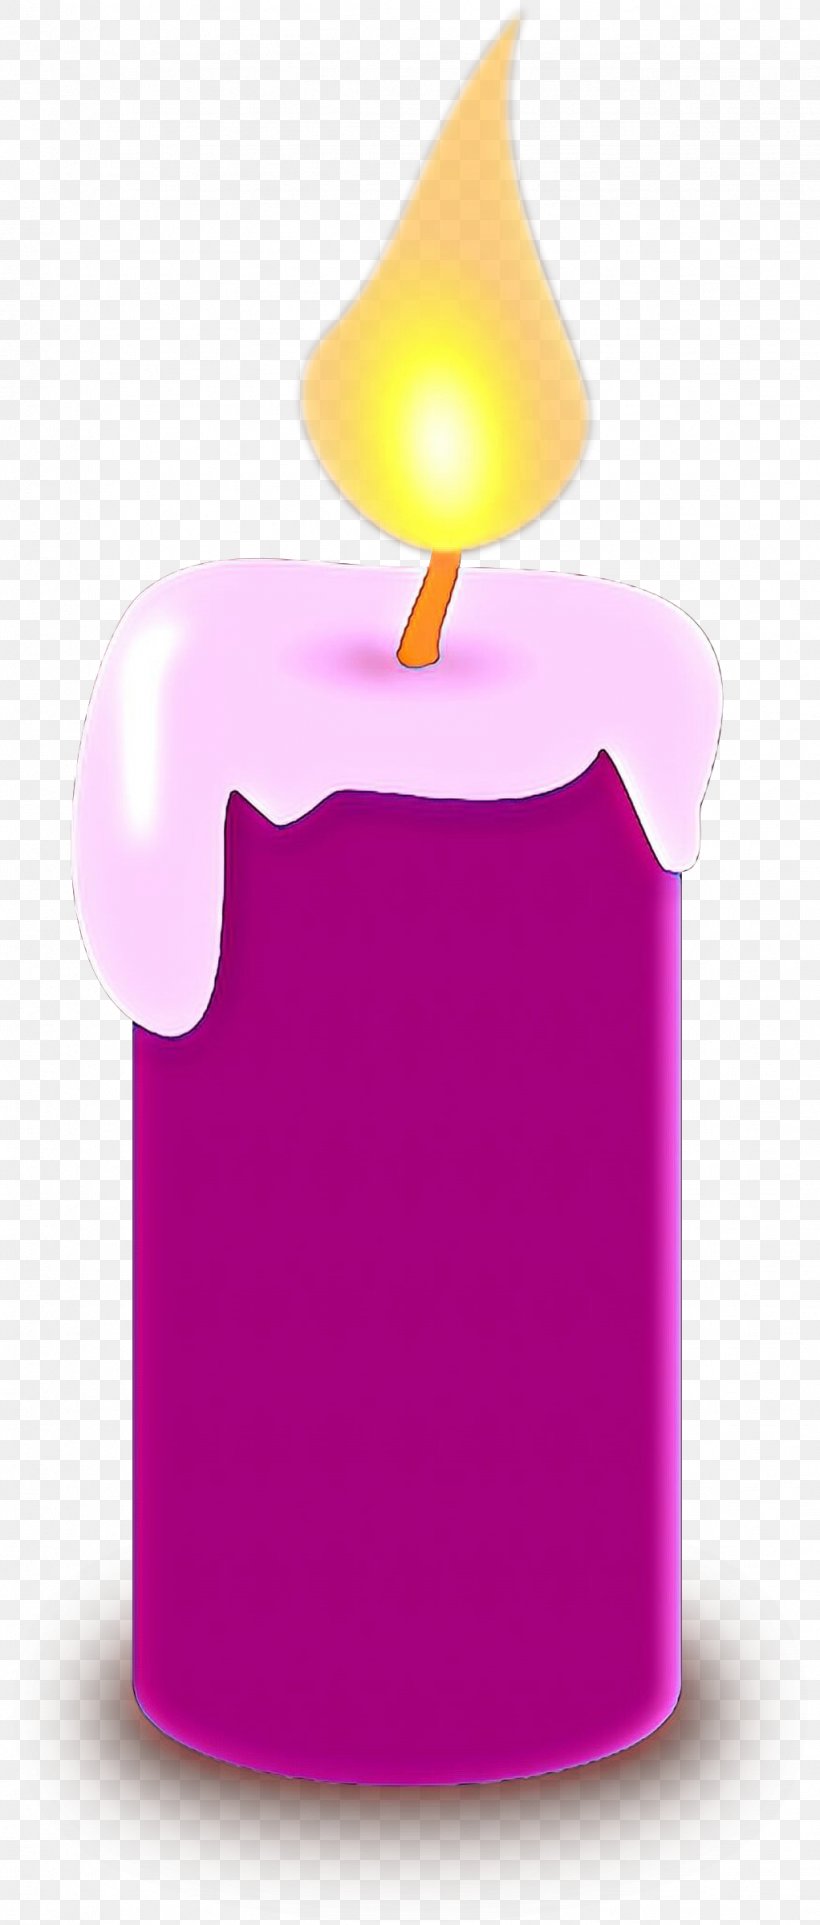 Wax Flameless Candle Lighting Product Design, PNG, 1022x2400px, Wax, Birthday Candle, Candle, Flameless Candle, Lighting Download Free